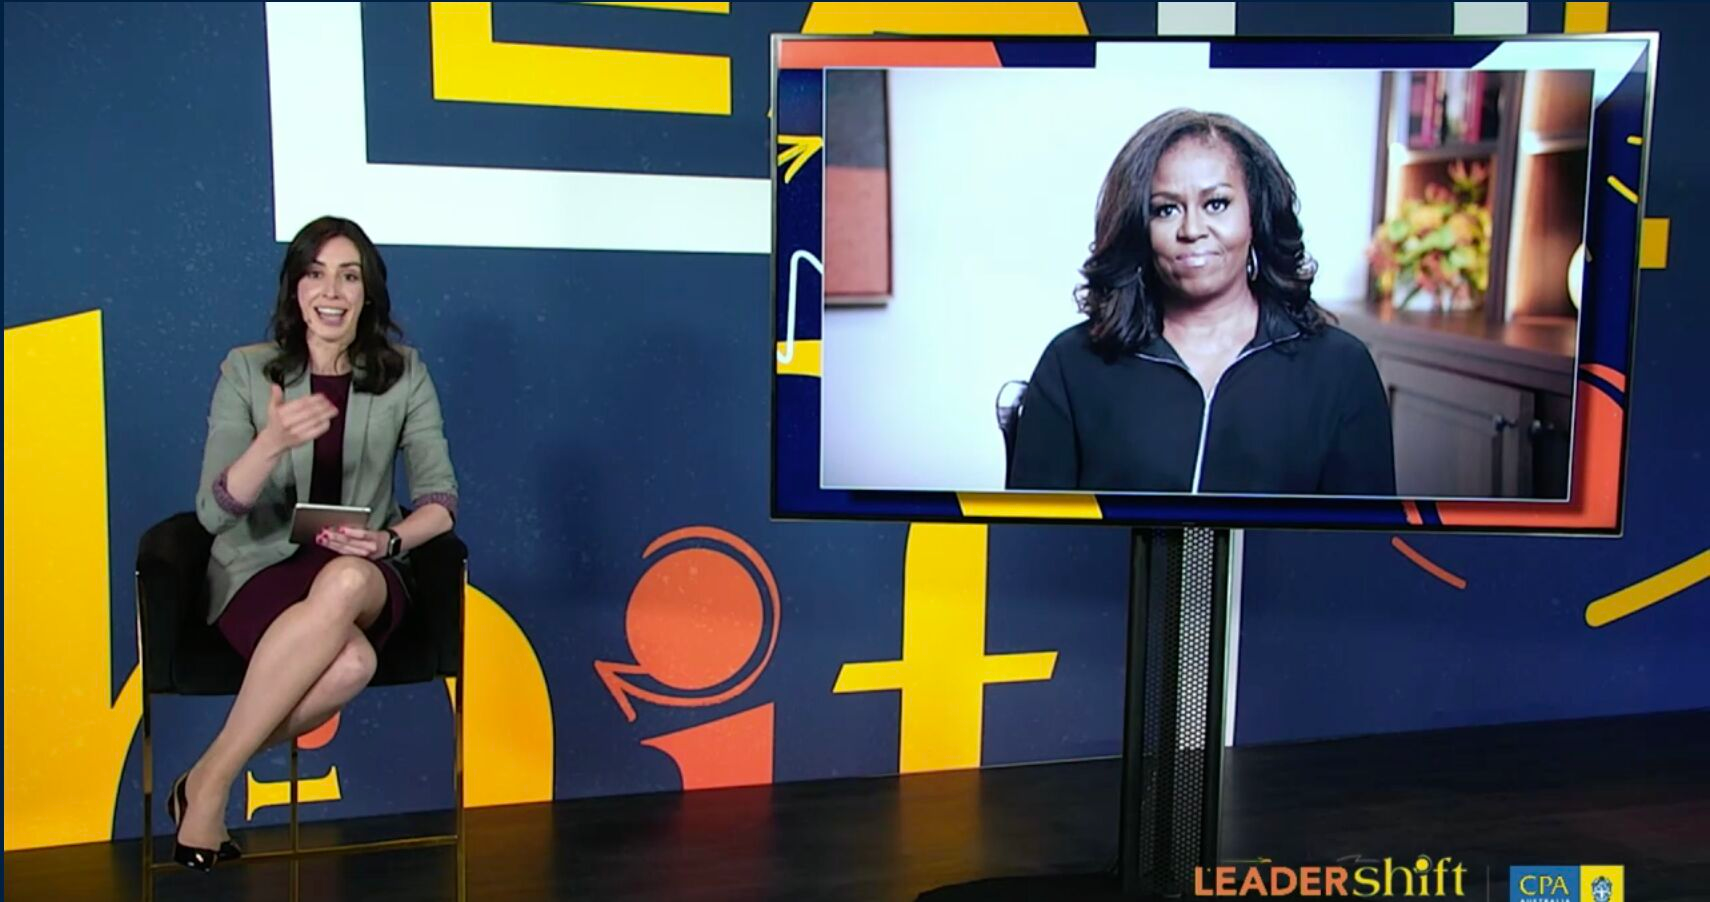 Holly Ransom interviewing Michelle Obama, industry pioneer and advocate for education, health & social equality. 